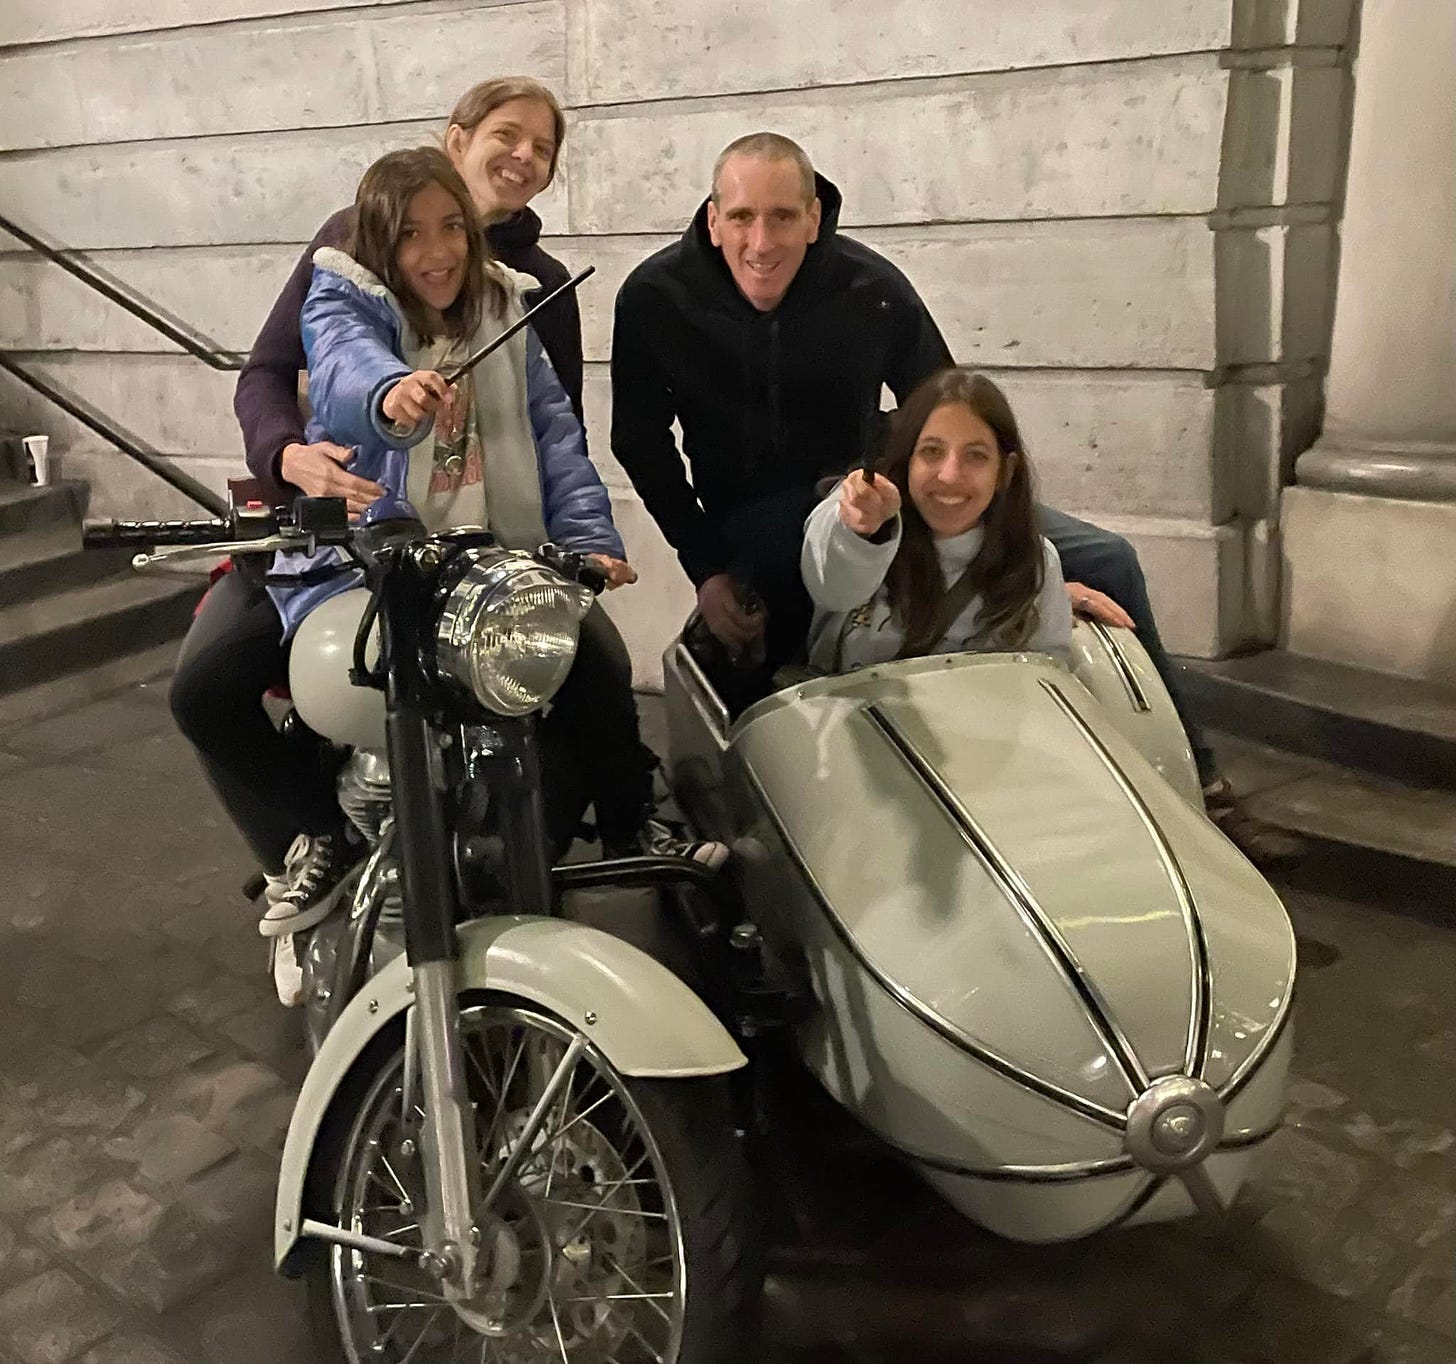 May be an image of 3 people, scooter and motorcycle